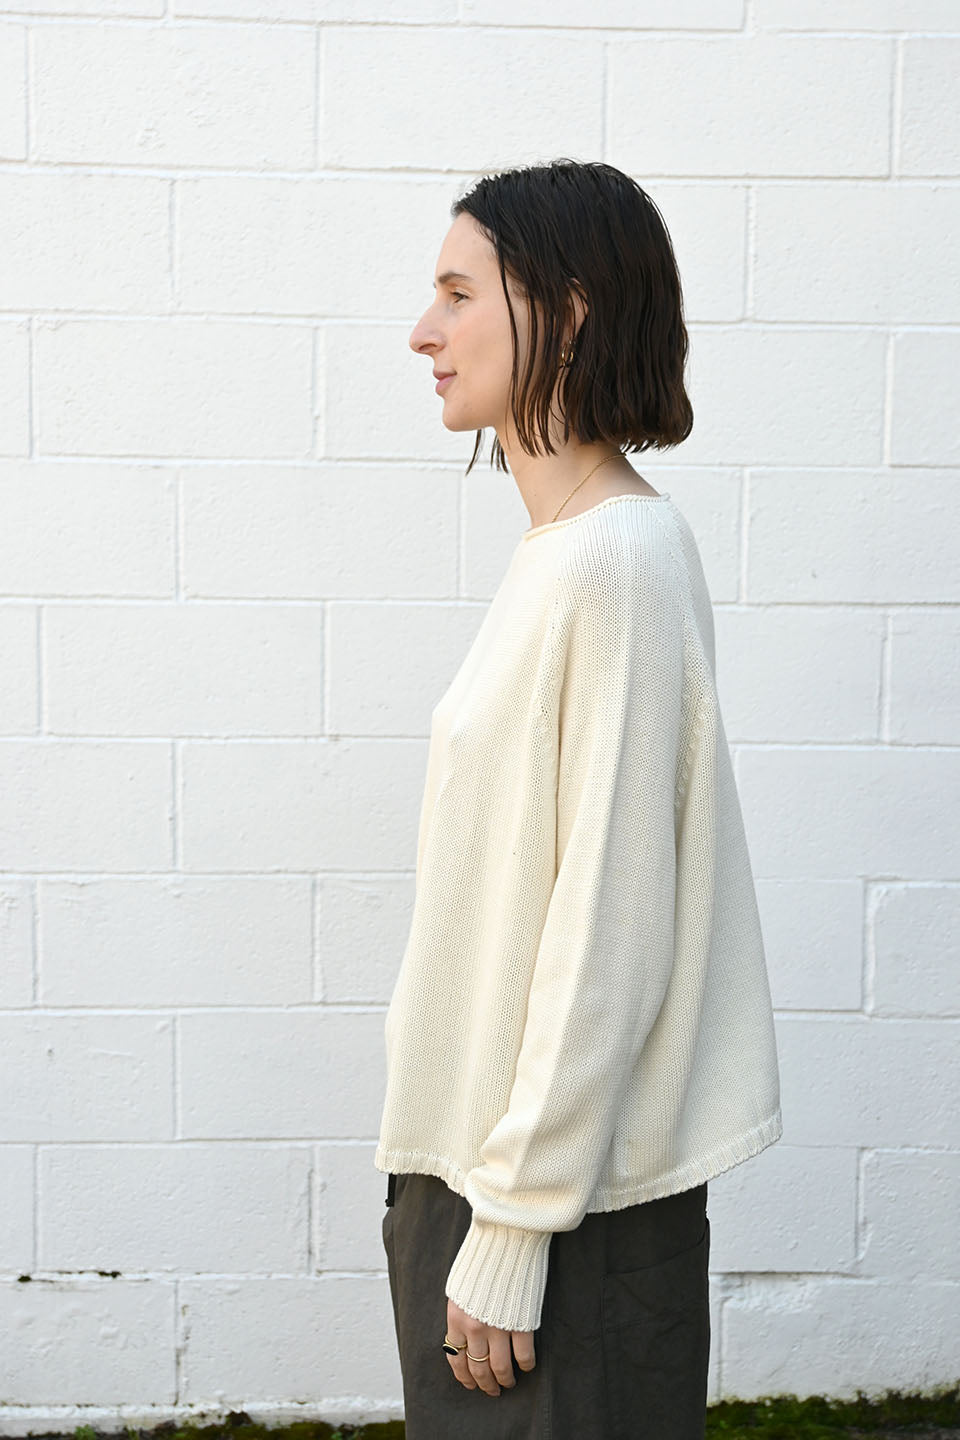 Ivory Cotton Pullover